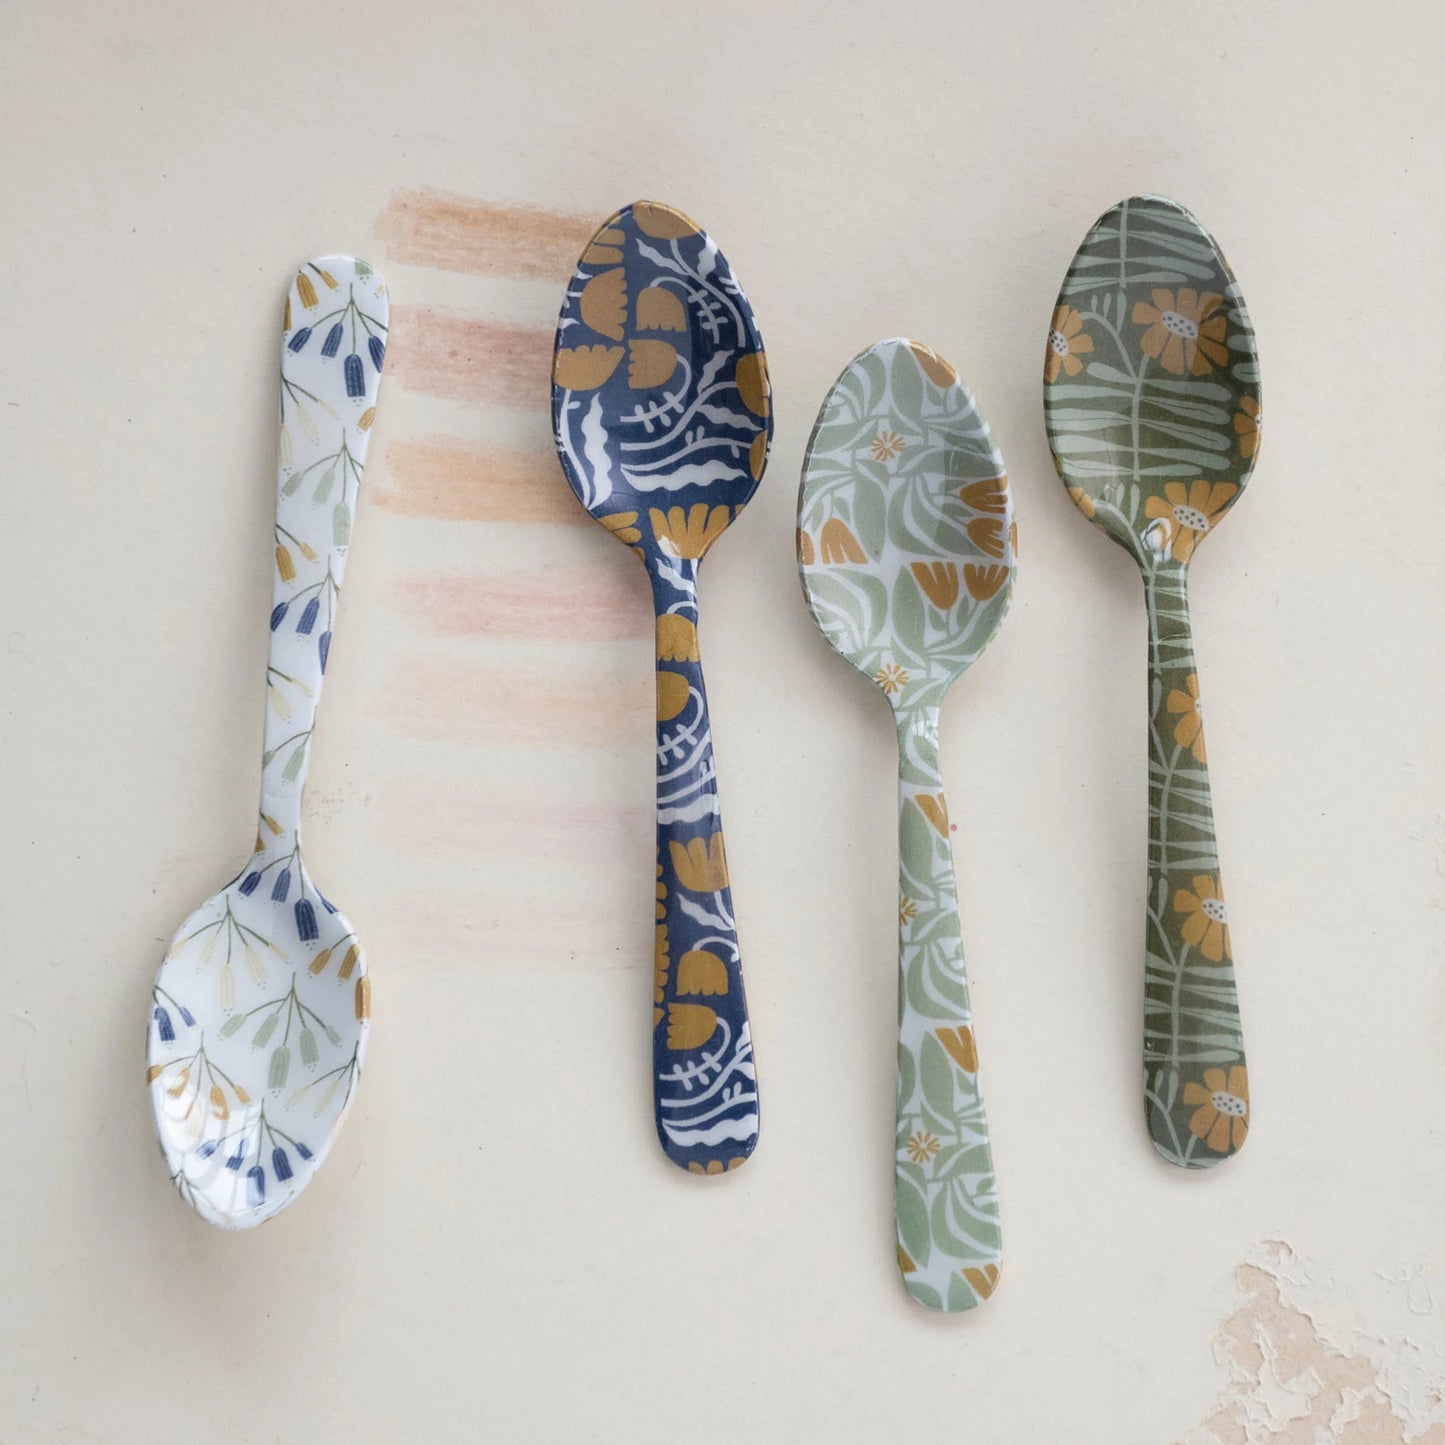 all four styles of enameled stainless steel spoon with flowers displayed against a light pink background